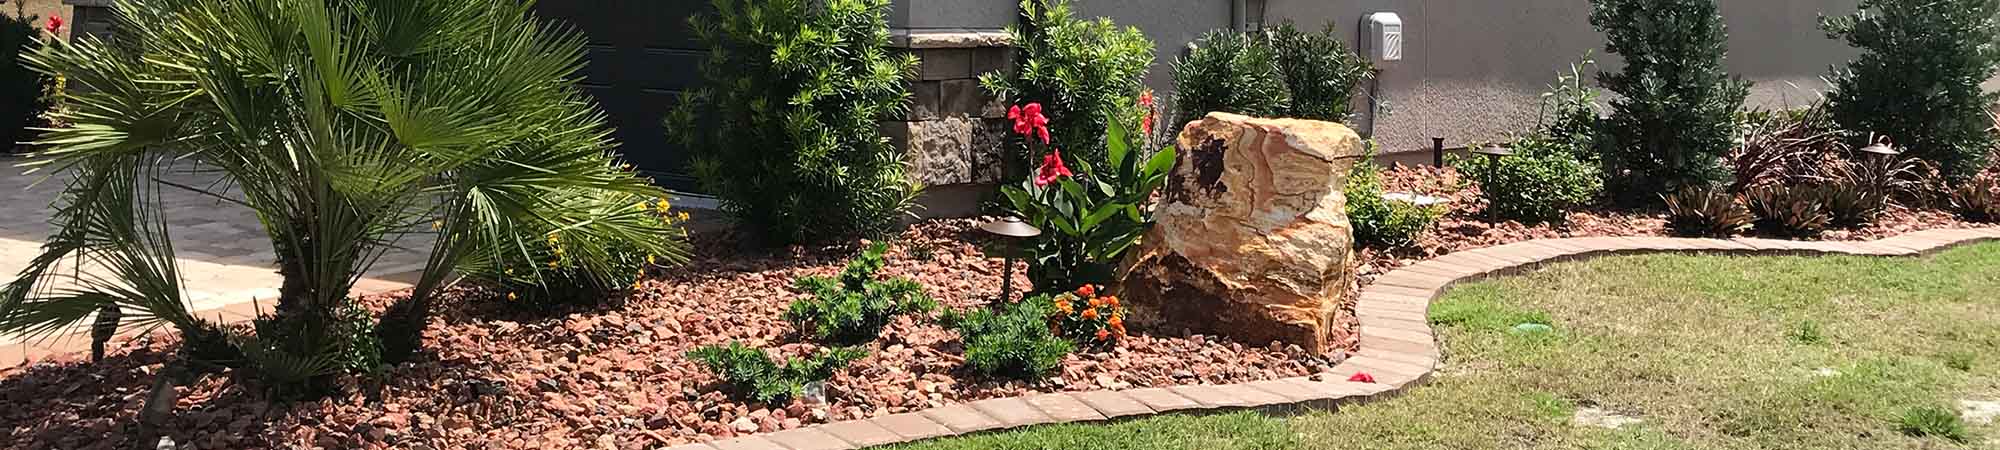 Flower bed with stone mulch